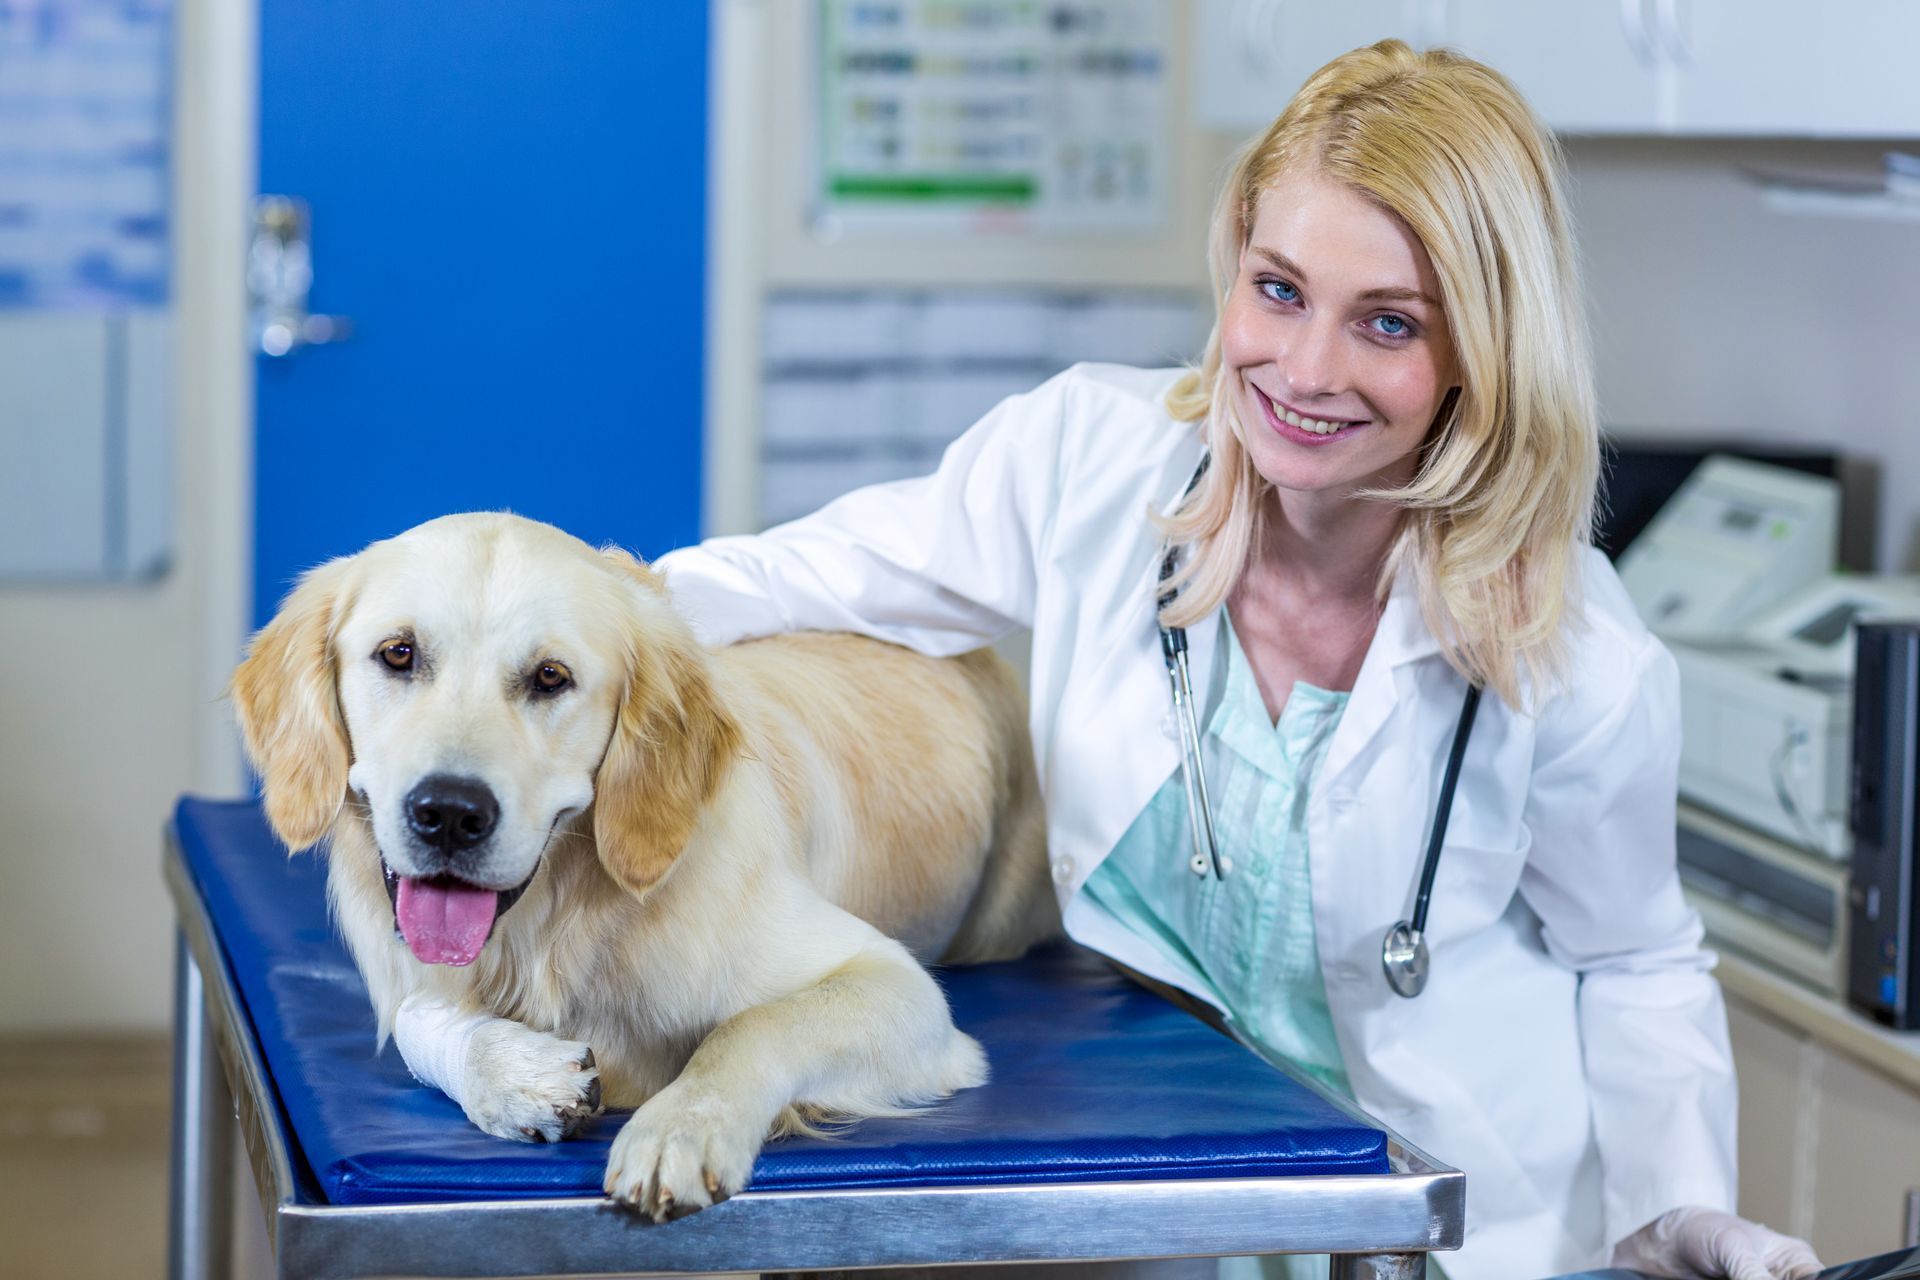 smiling female veterinarian stands next to a Labrador dog on examination table to promote the benefits of online membership offers